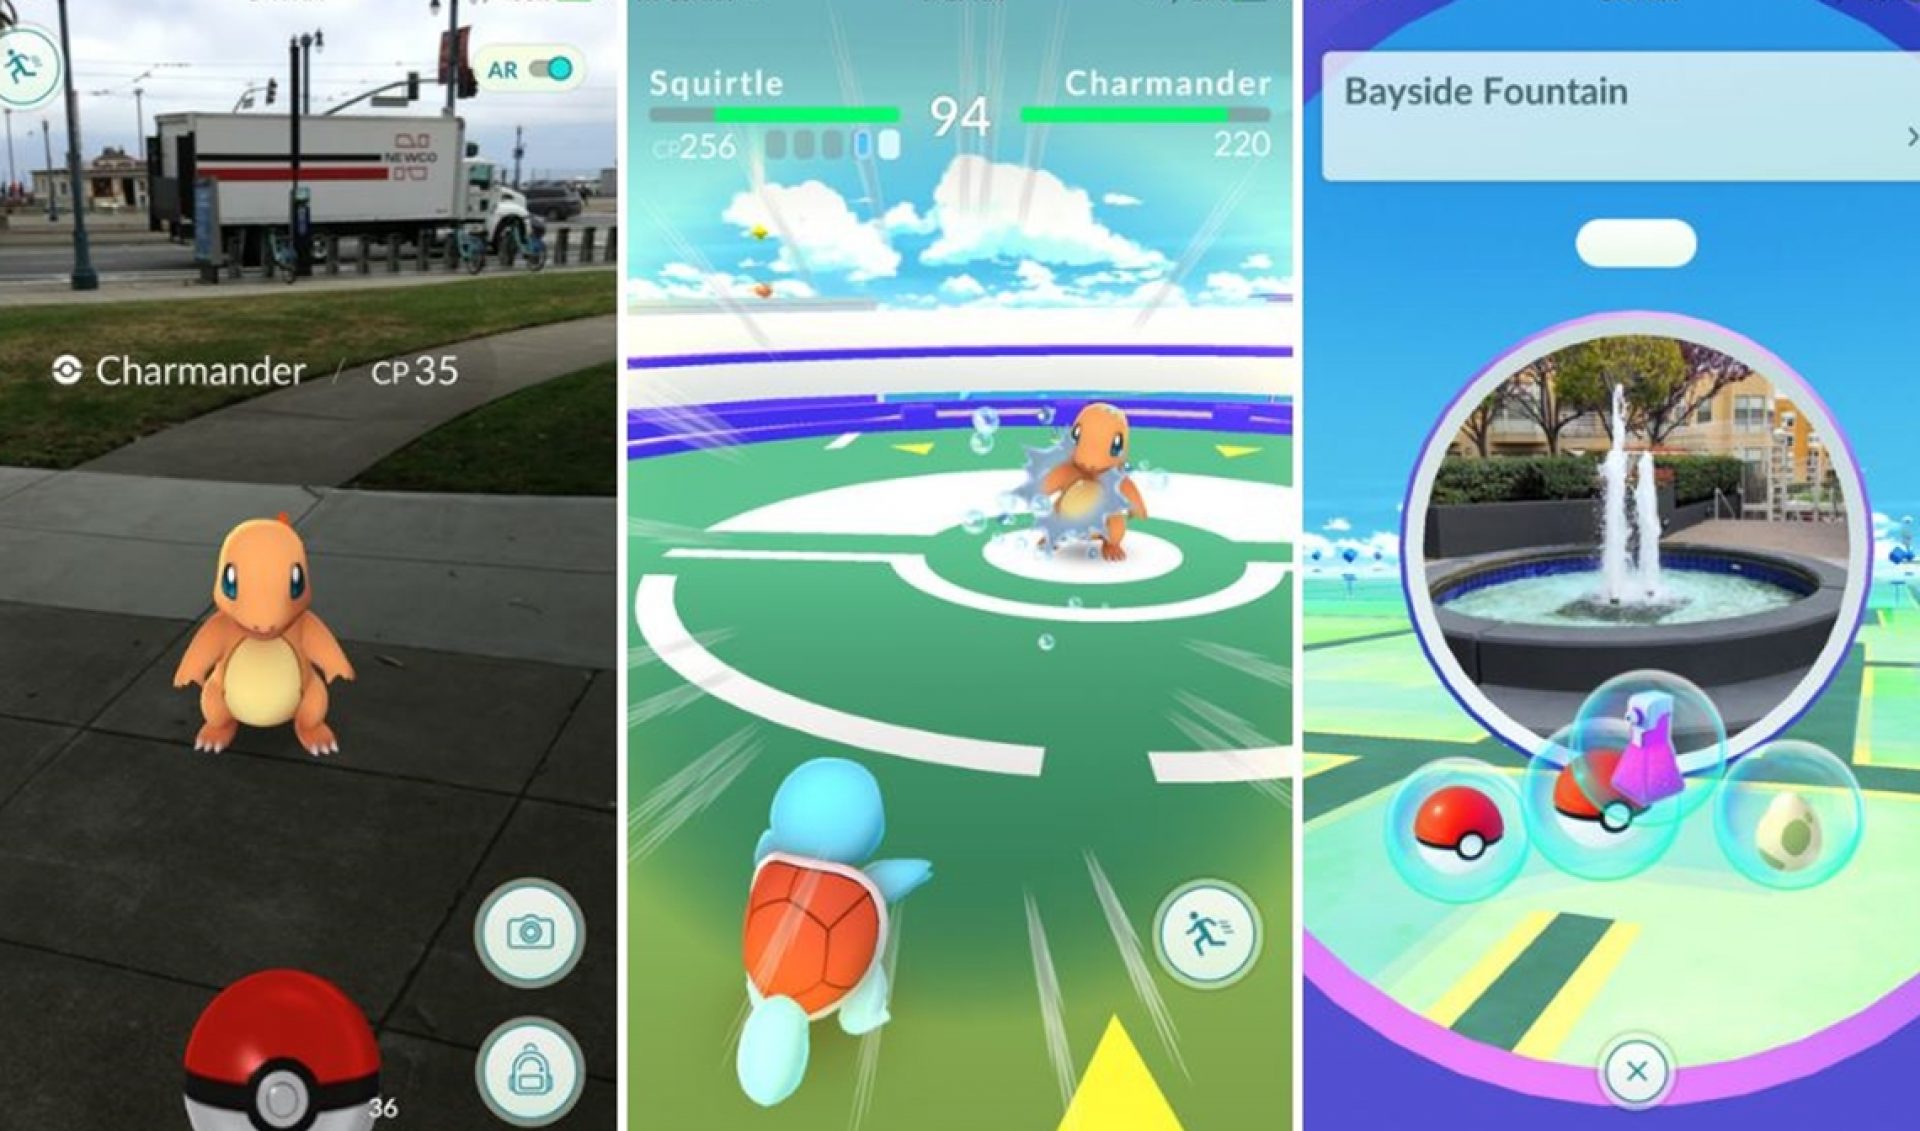 Popular Russian YouTuber Faces 5 Years In Jail For Playing Pokémon Go In Church